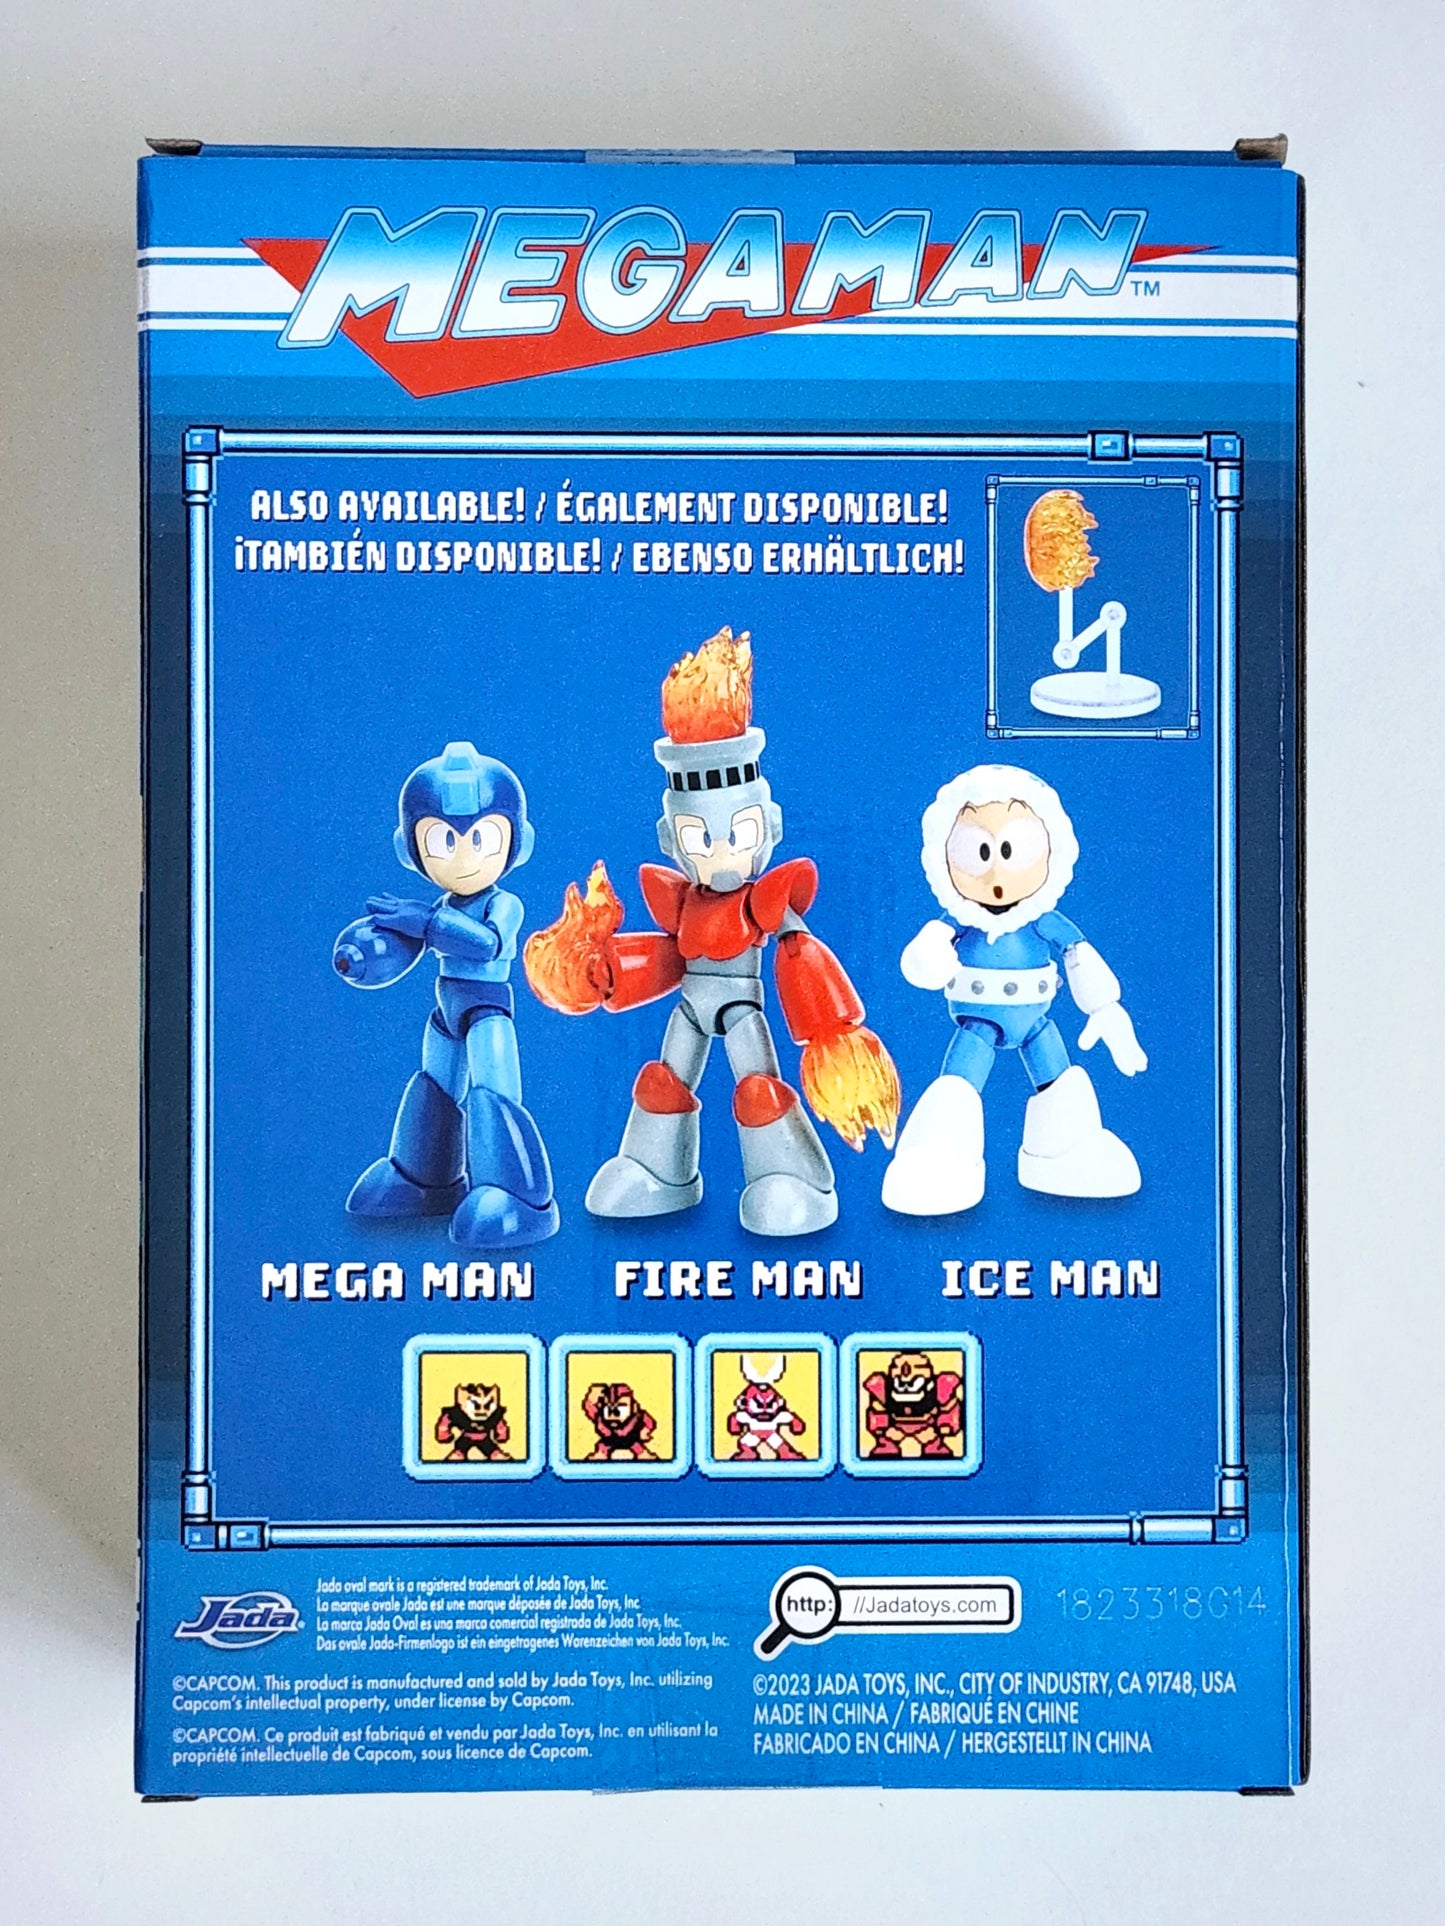 Fire Man 1:12 Scale Action Figure from Mega Man